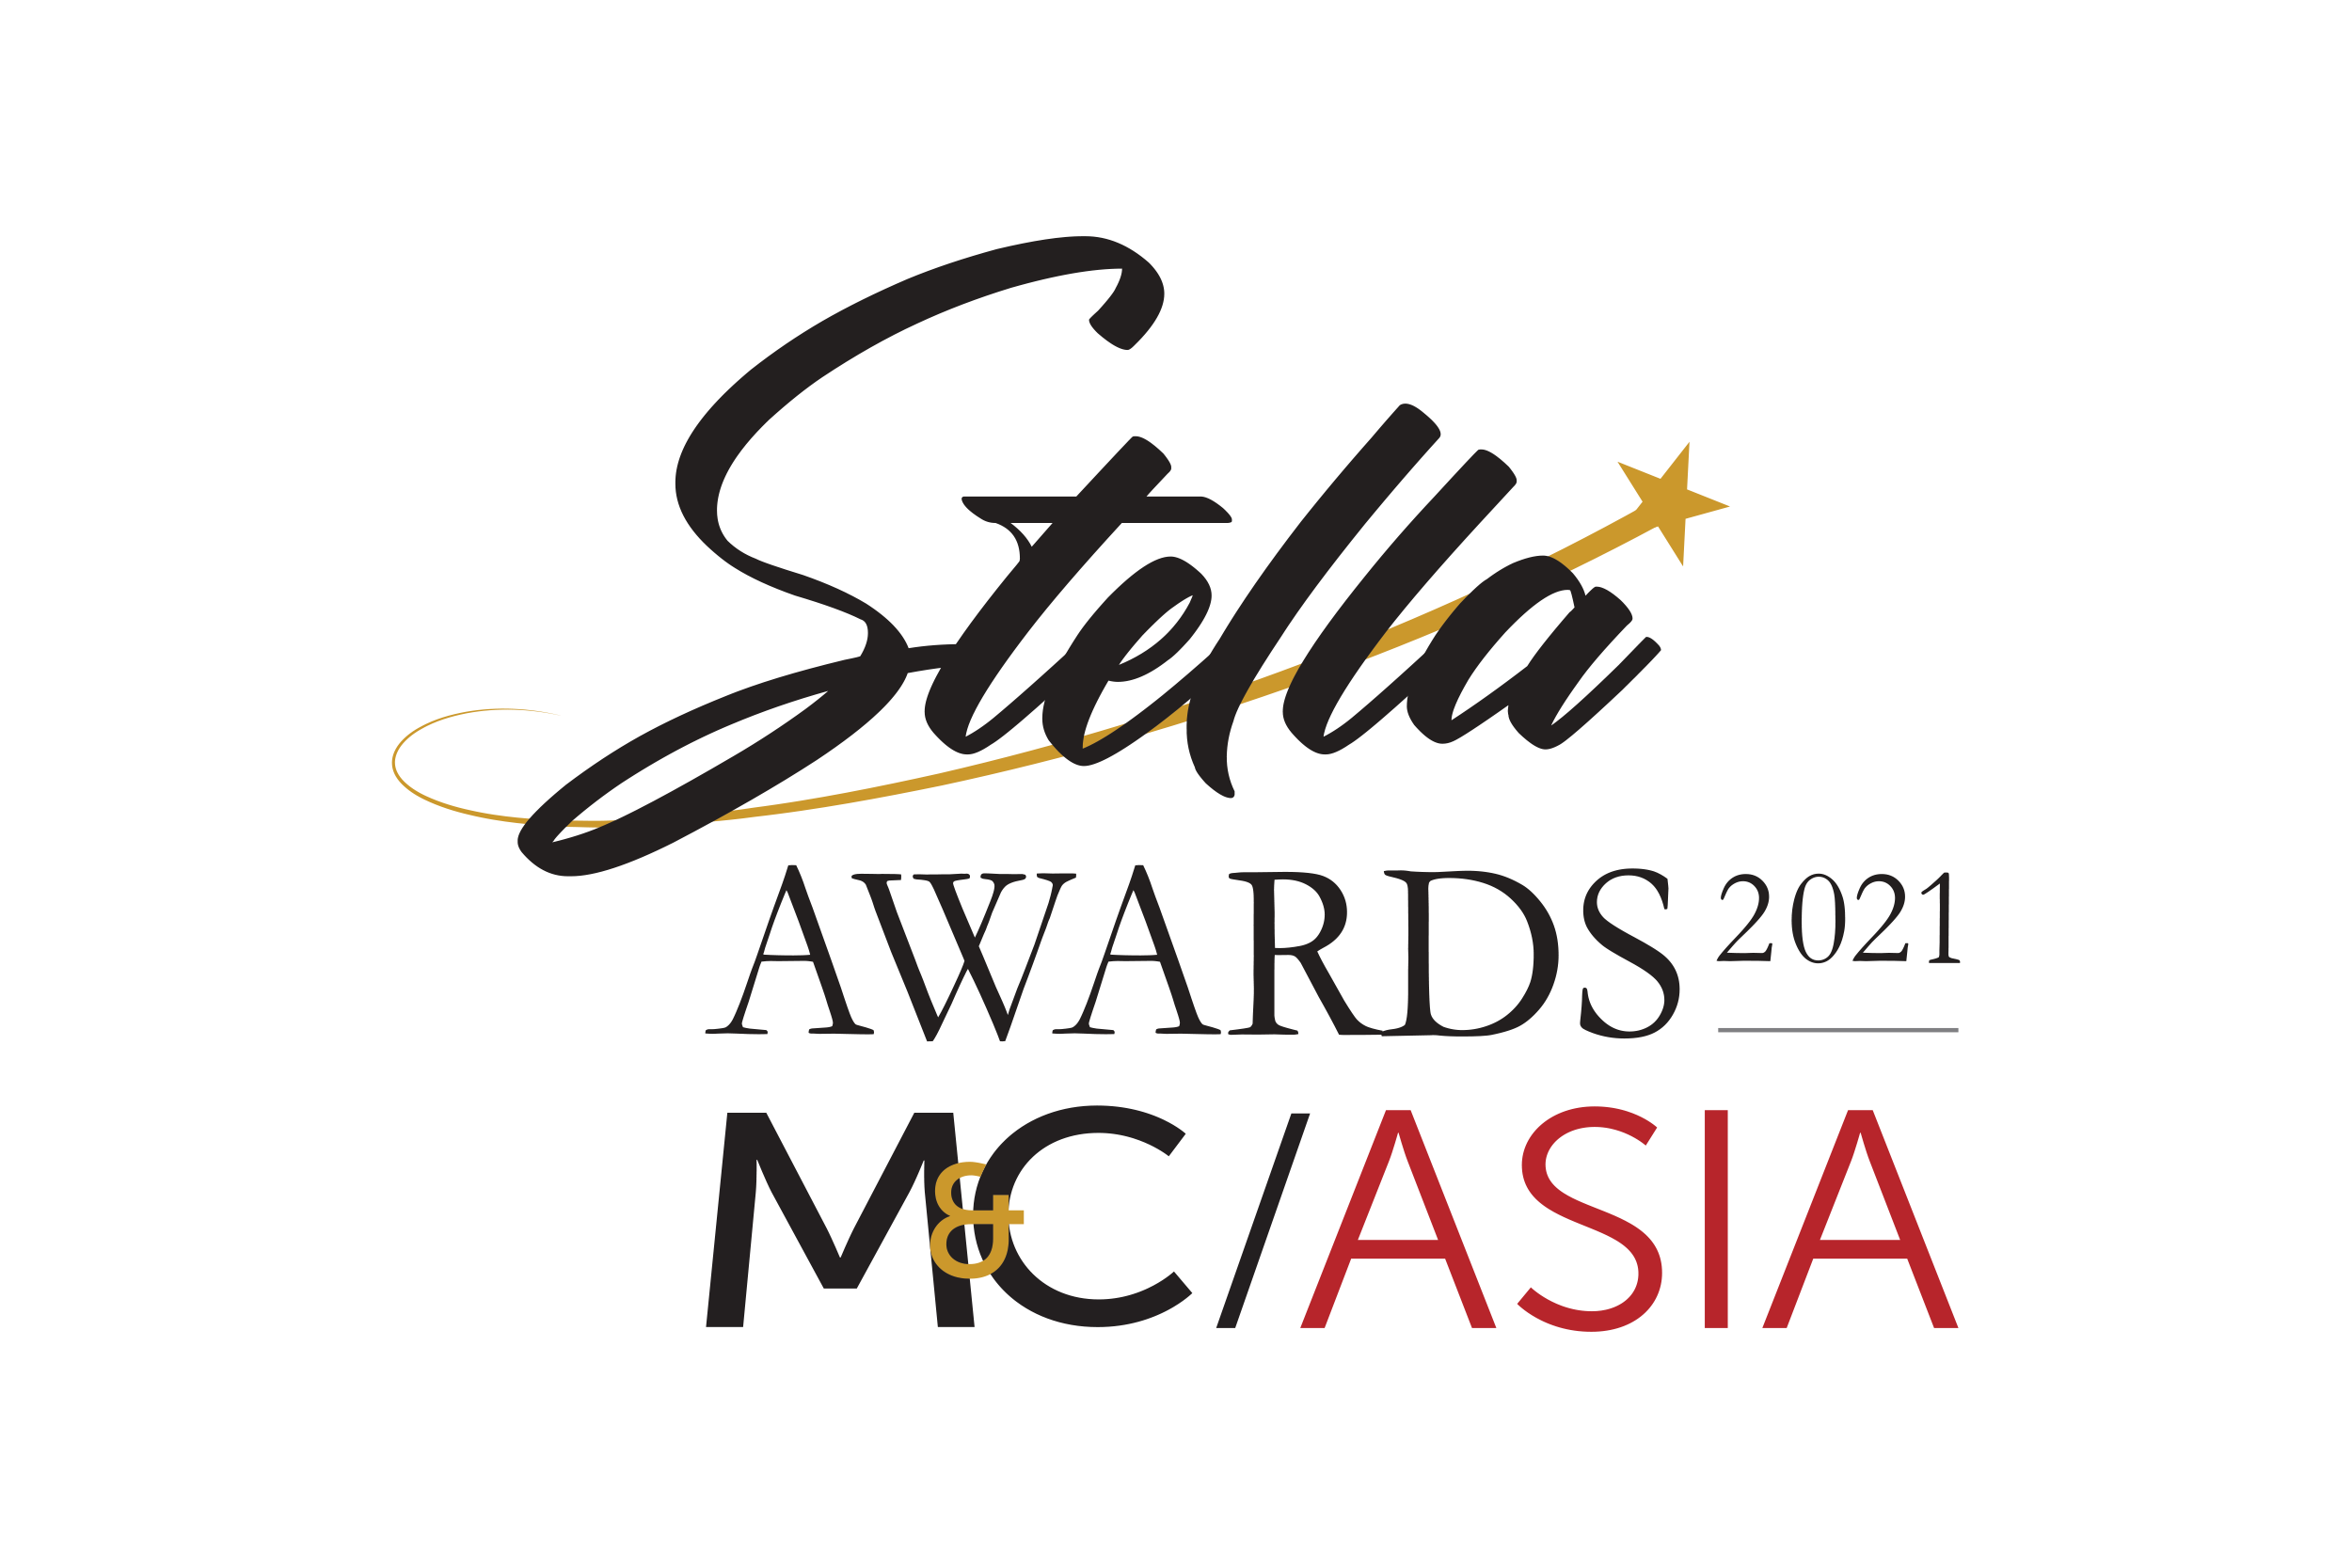 Voted the “Best Convention Centre (North Asia)” at the M&C Asia Stella Awards 2021 and 2020, organised by Northstar Meetings Group.